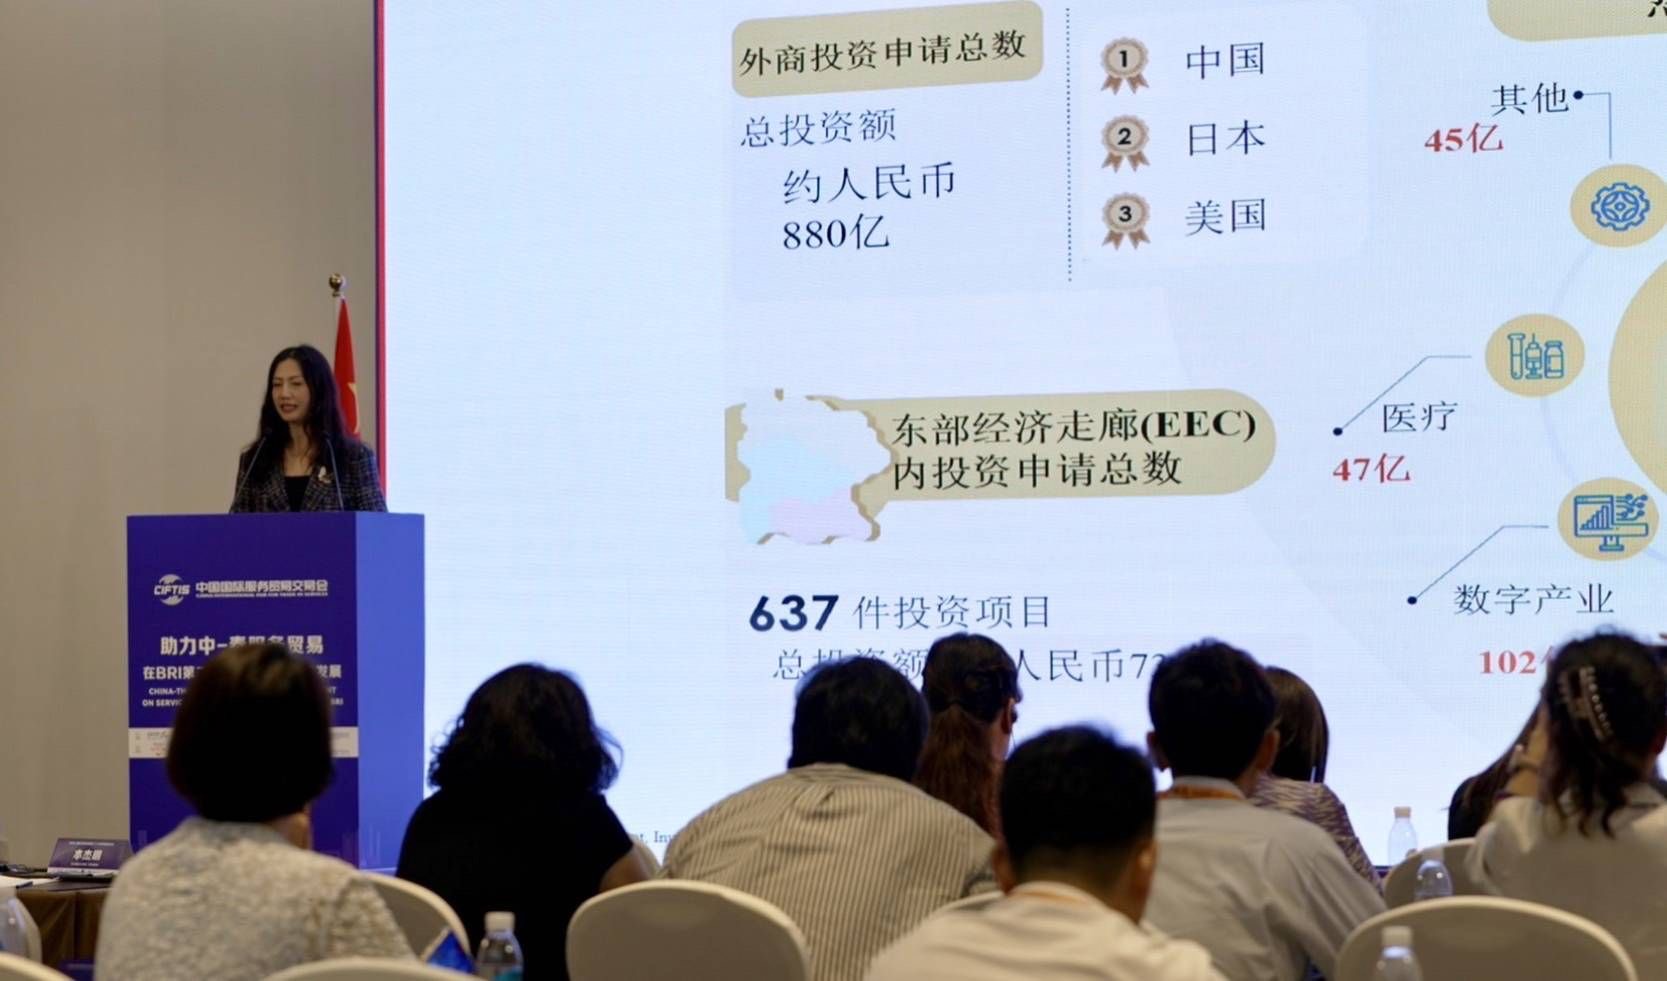 Kudun and Partners Participated at the High-Quality Development on Service Trade Forum, held as part of the 2nd Decade of Belt and Road Initiative (BRI)